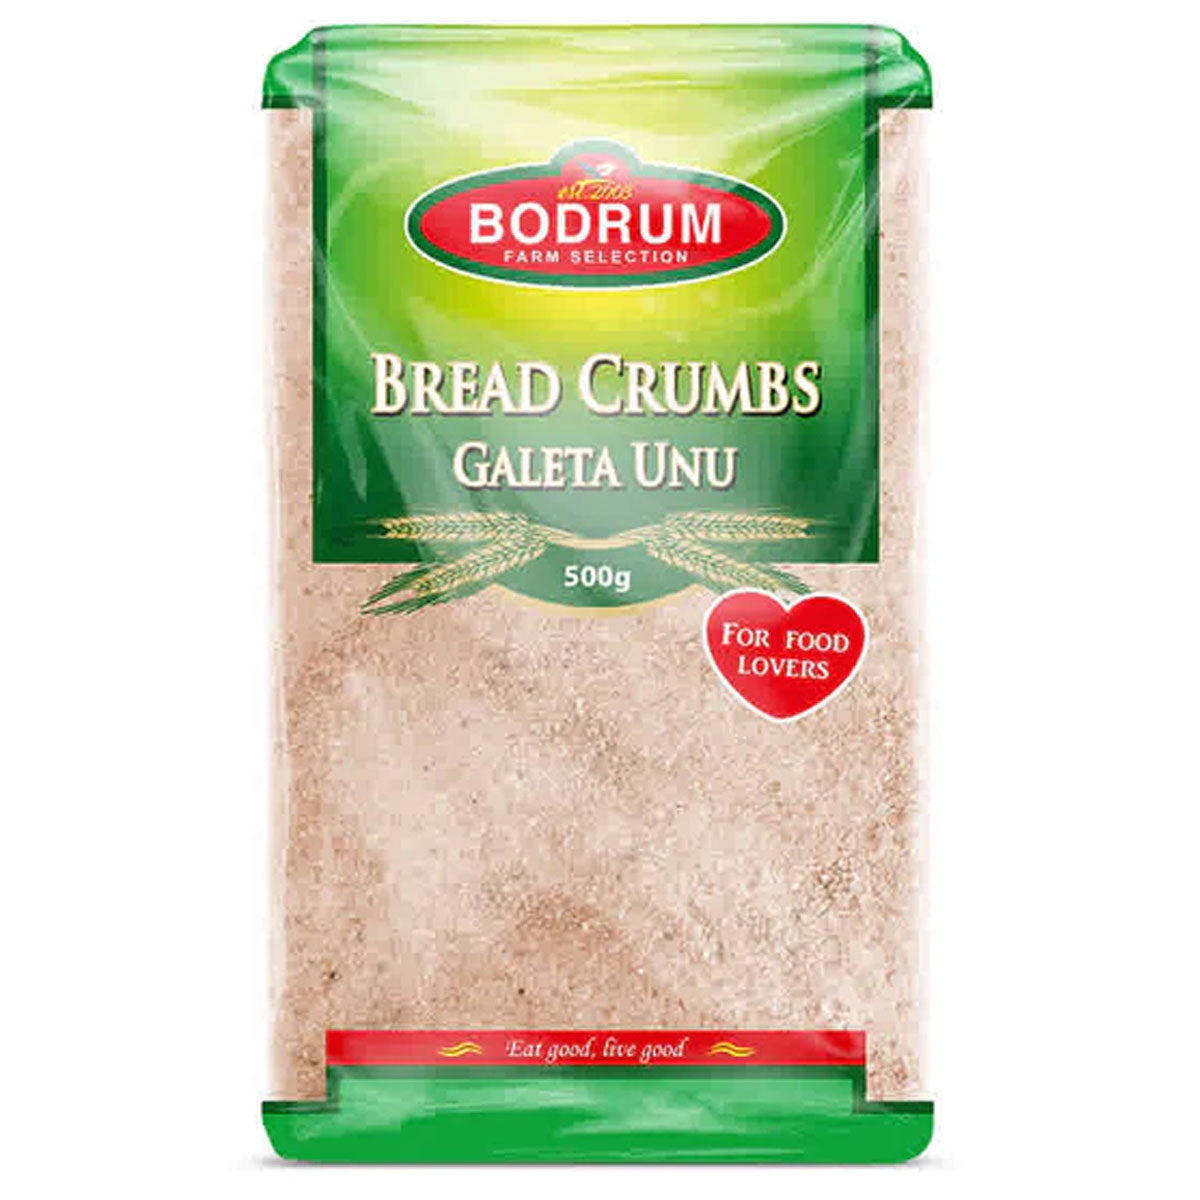 Bodrum - Bread Crumbs - 500g - Continental Food Store